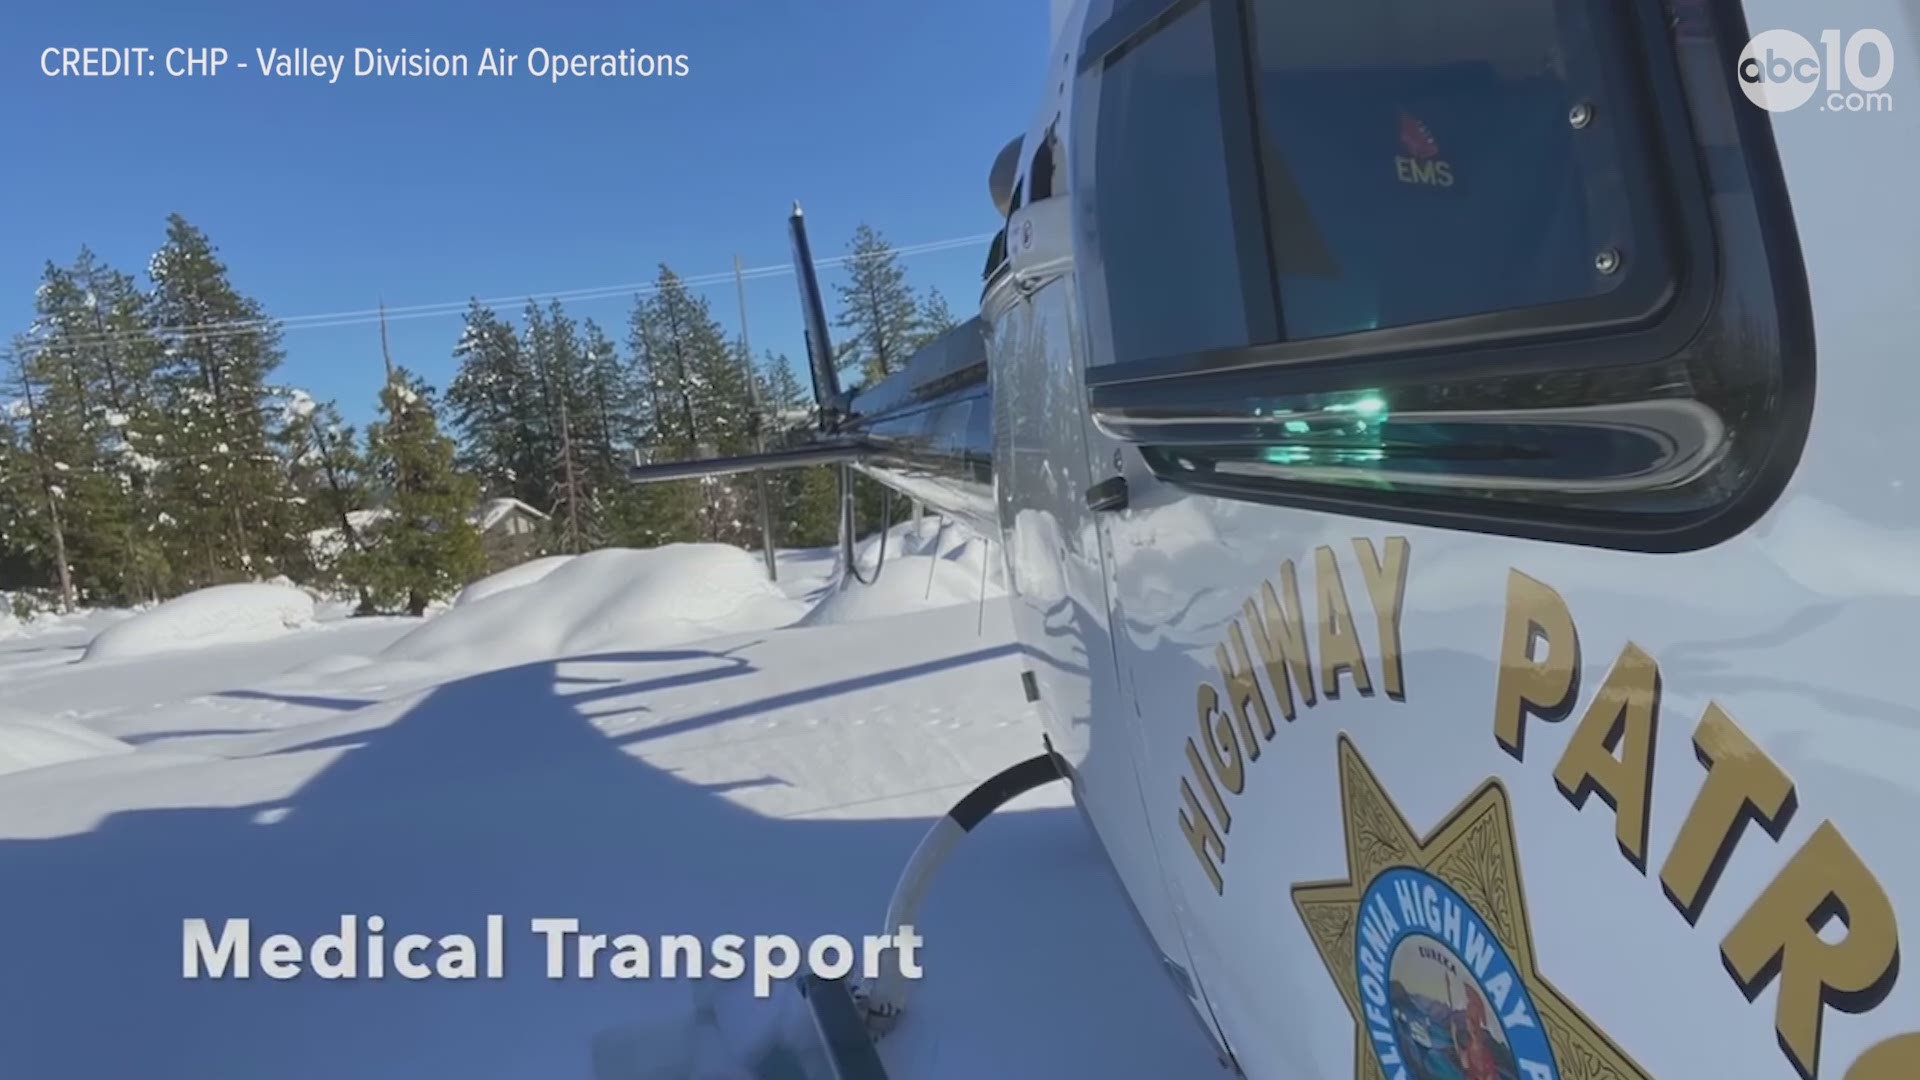 CHP helicopter H-20 successfully conducted four rescues over the weekend -- one of which was a snowboarder who had been missing for nearly a week!